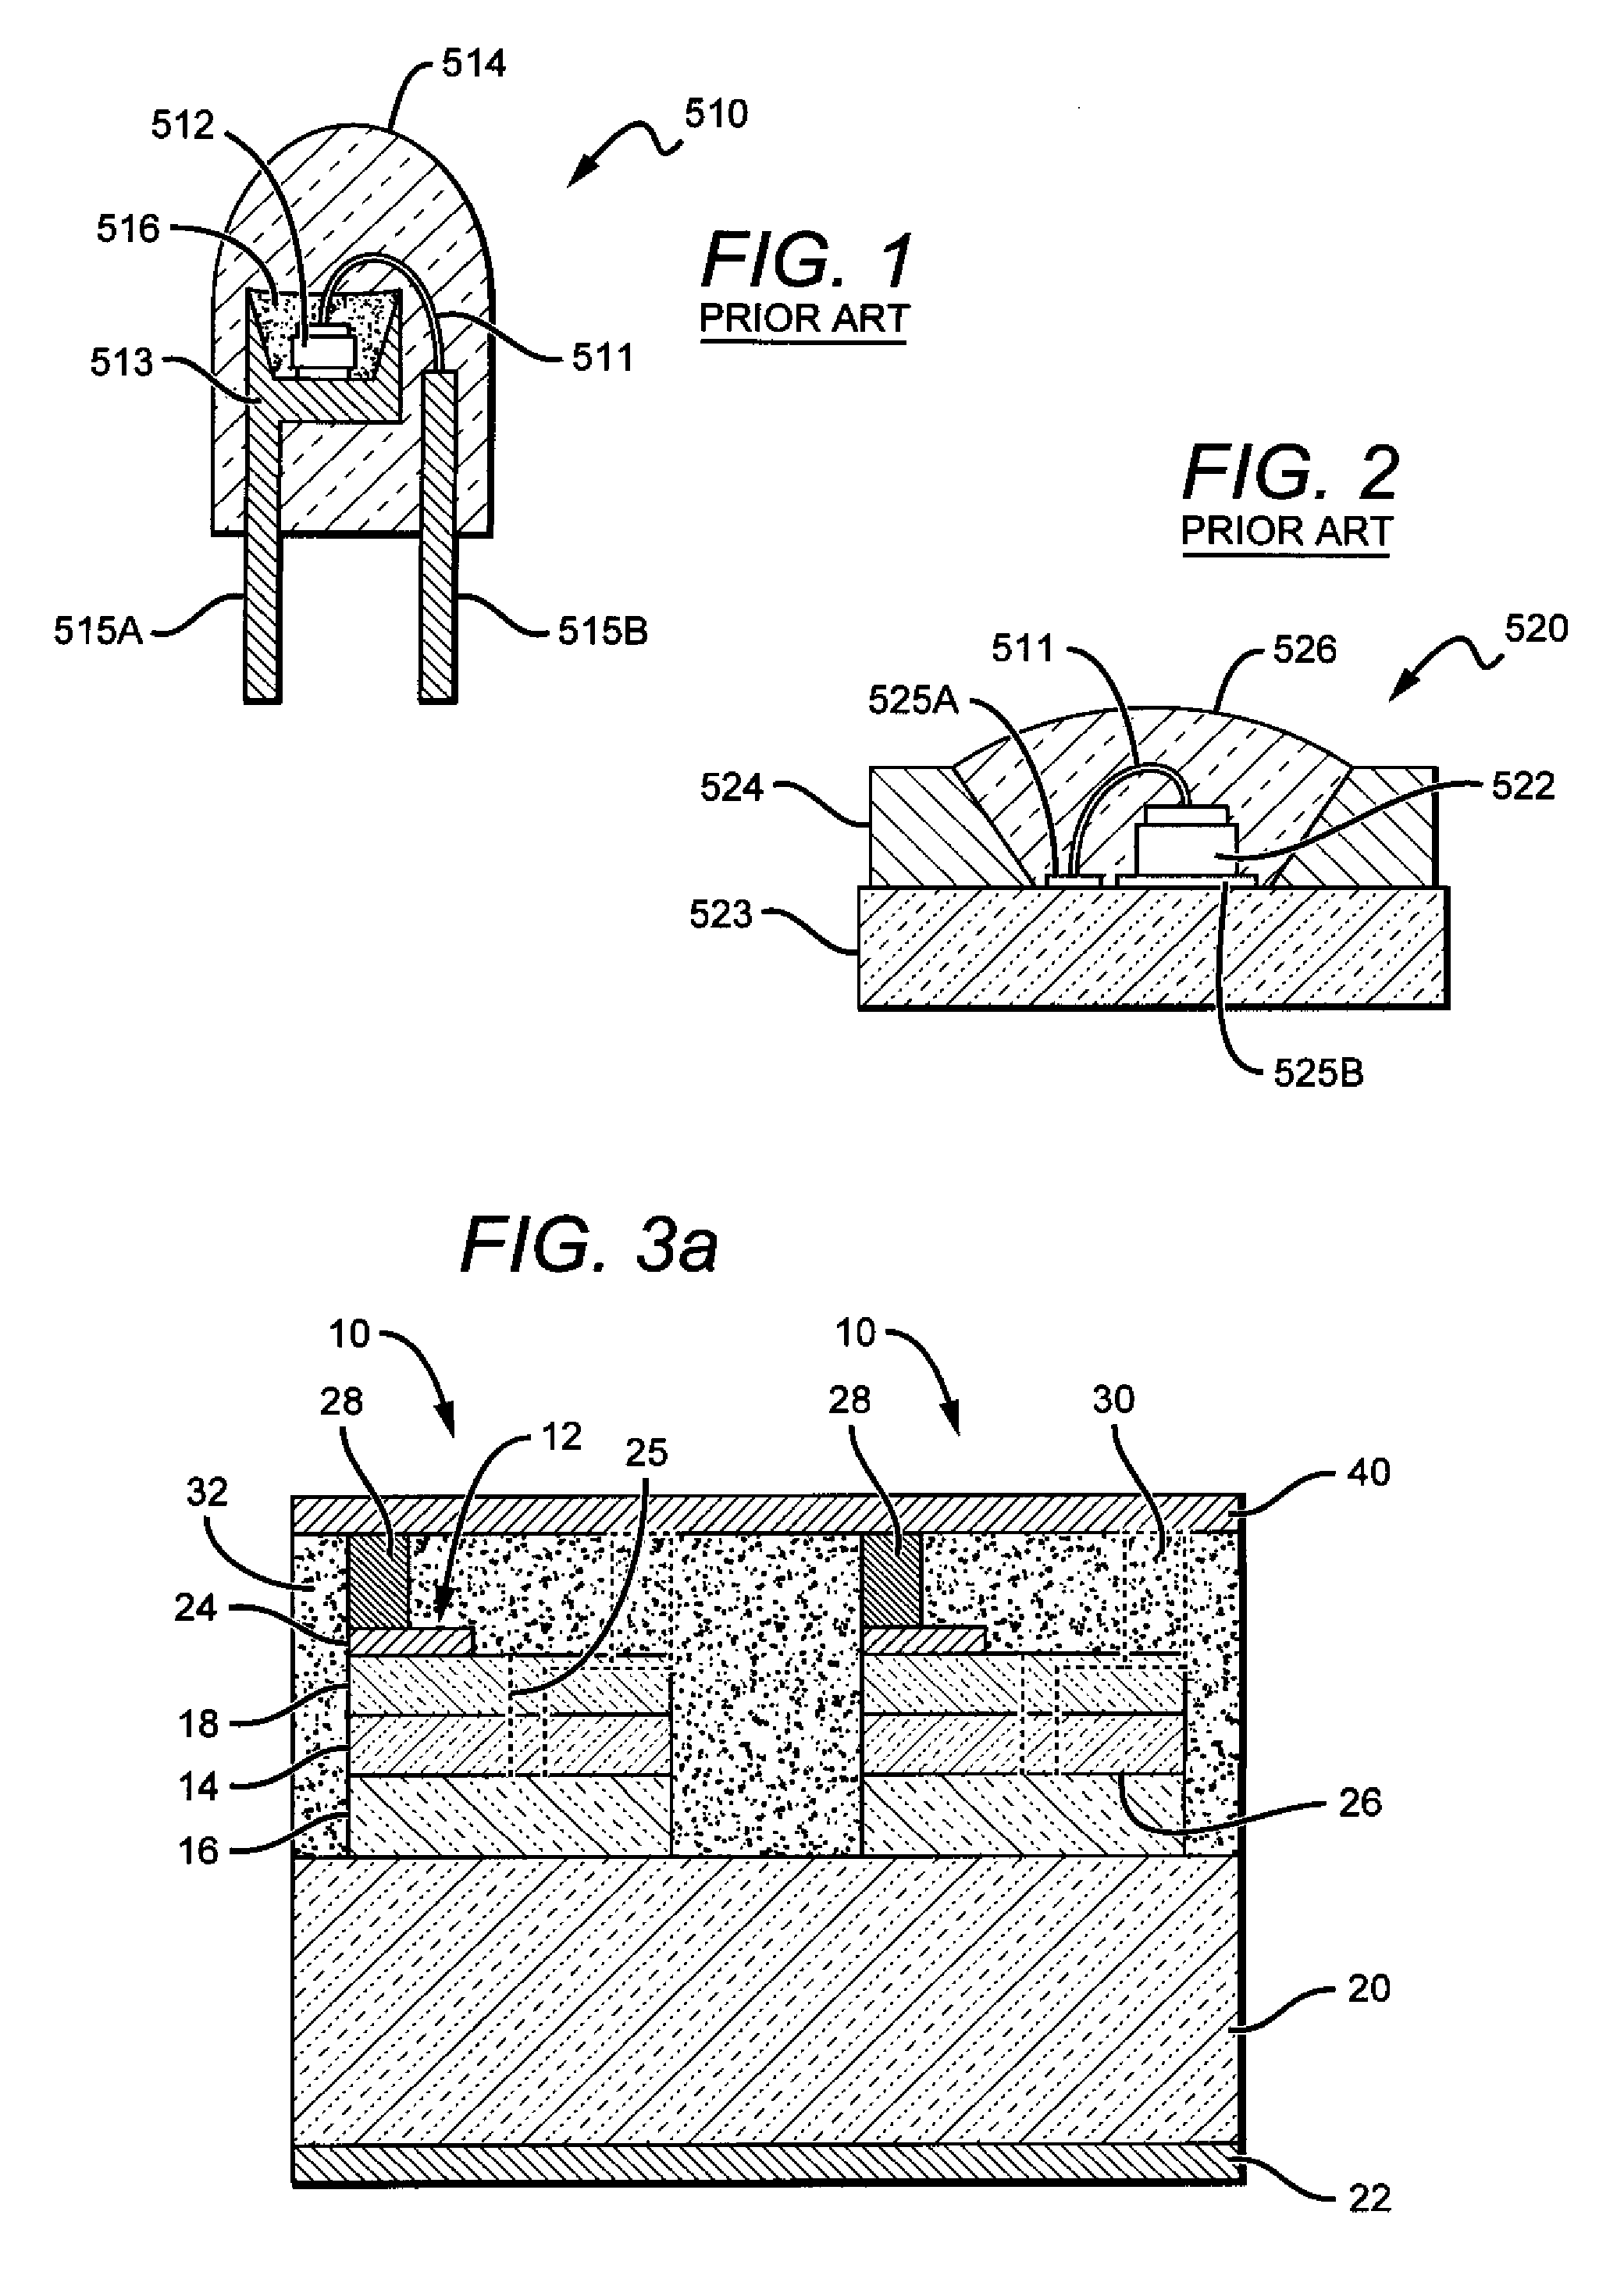 Light transmission control for masking appearance of solid state light sources